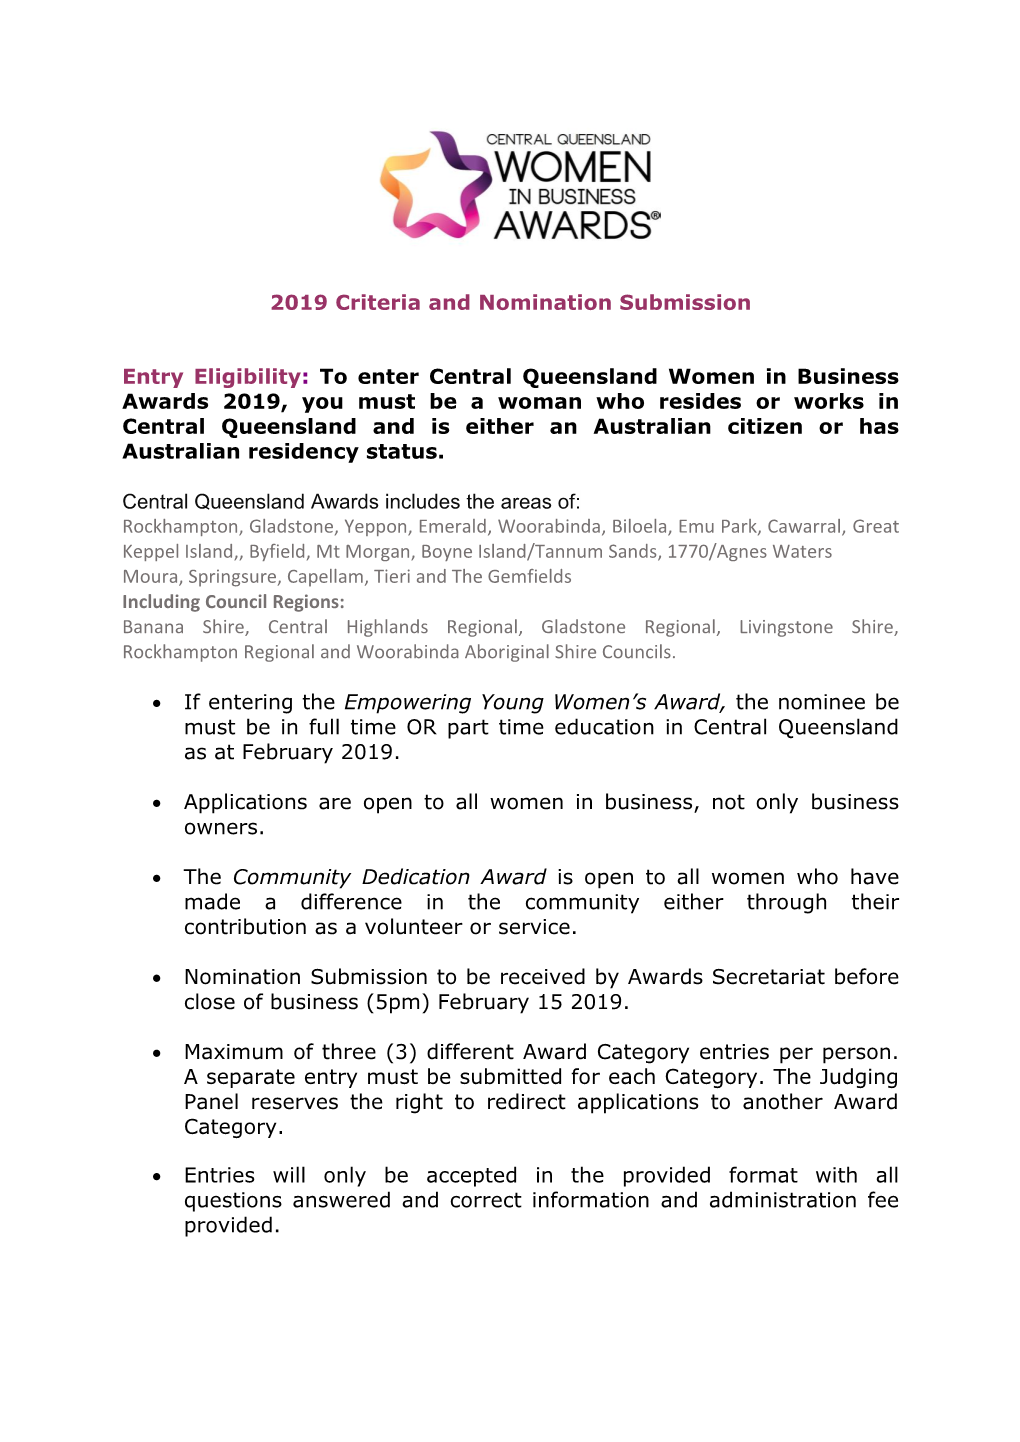 2019 Criteria and Nomination Submission Entry Eligibility: to Enter Central Queensland Women in Business Awards 2019, You Must B